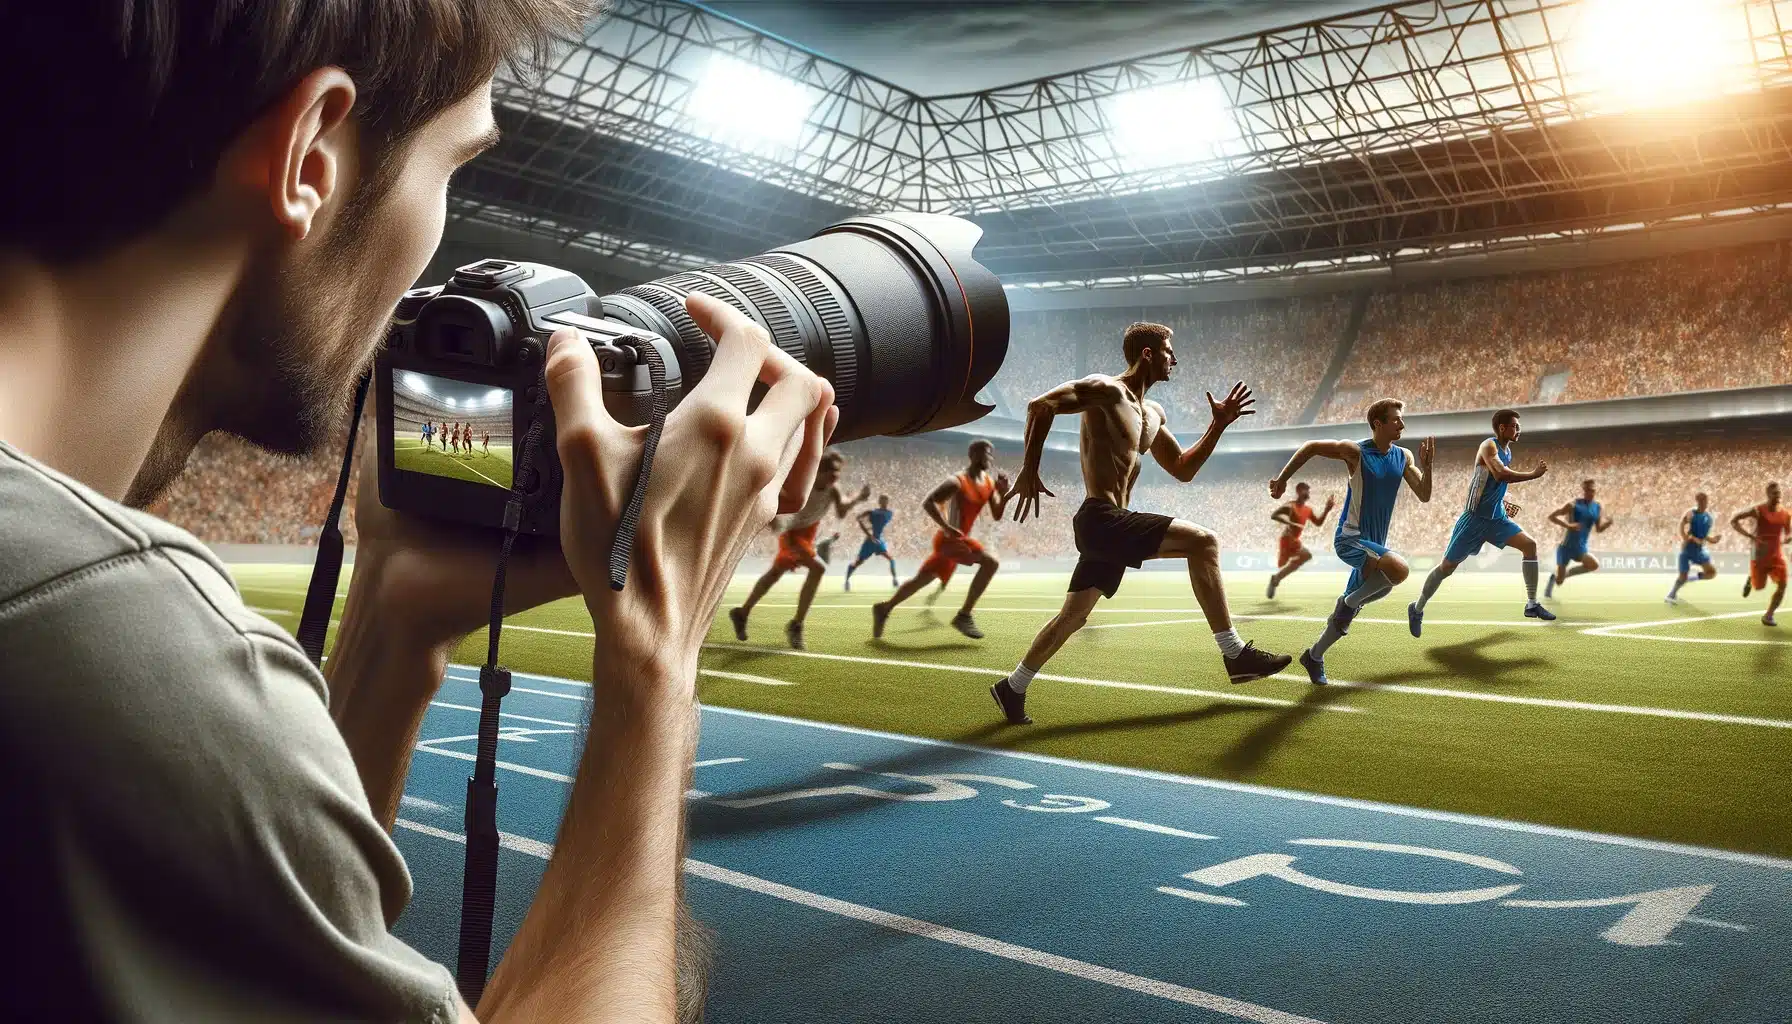 Photographer at sports ground capturing action, illustrating sports photography tips for beginners.